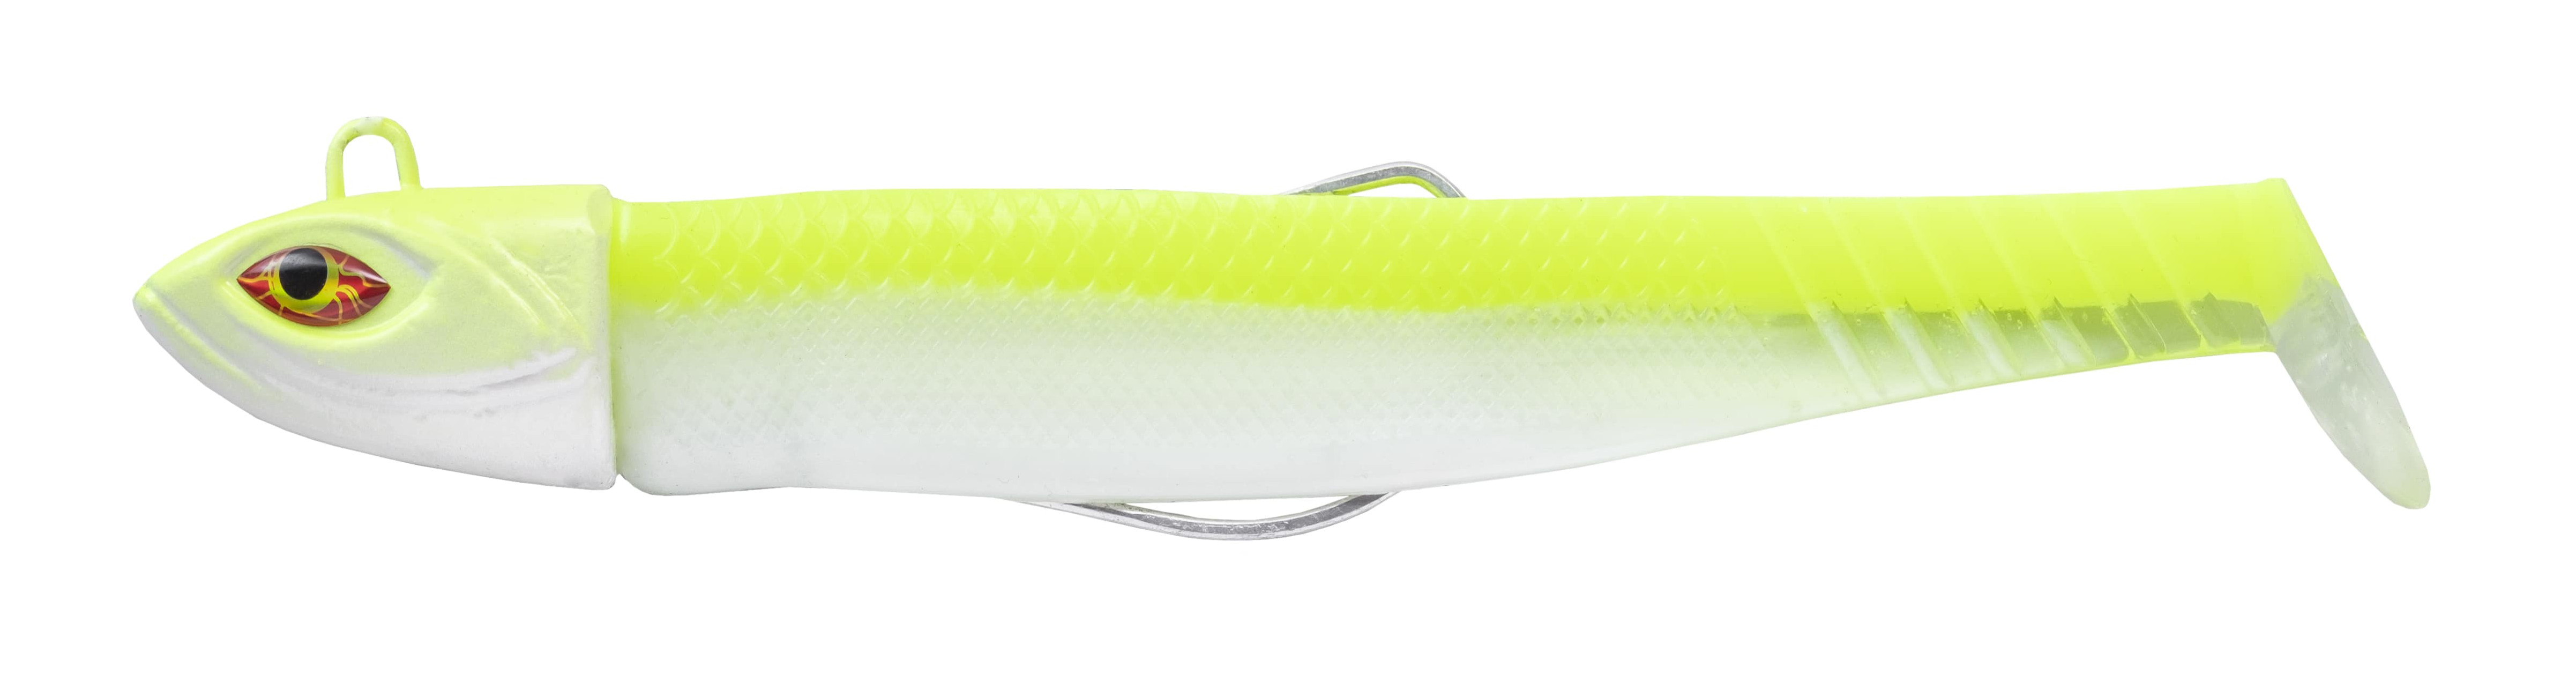 Cinnetic Crafty Candy Shad 10.5cm (25g) (2 pcs) - White Chartreuse